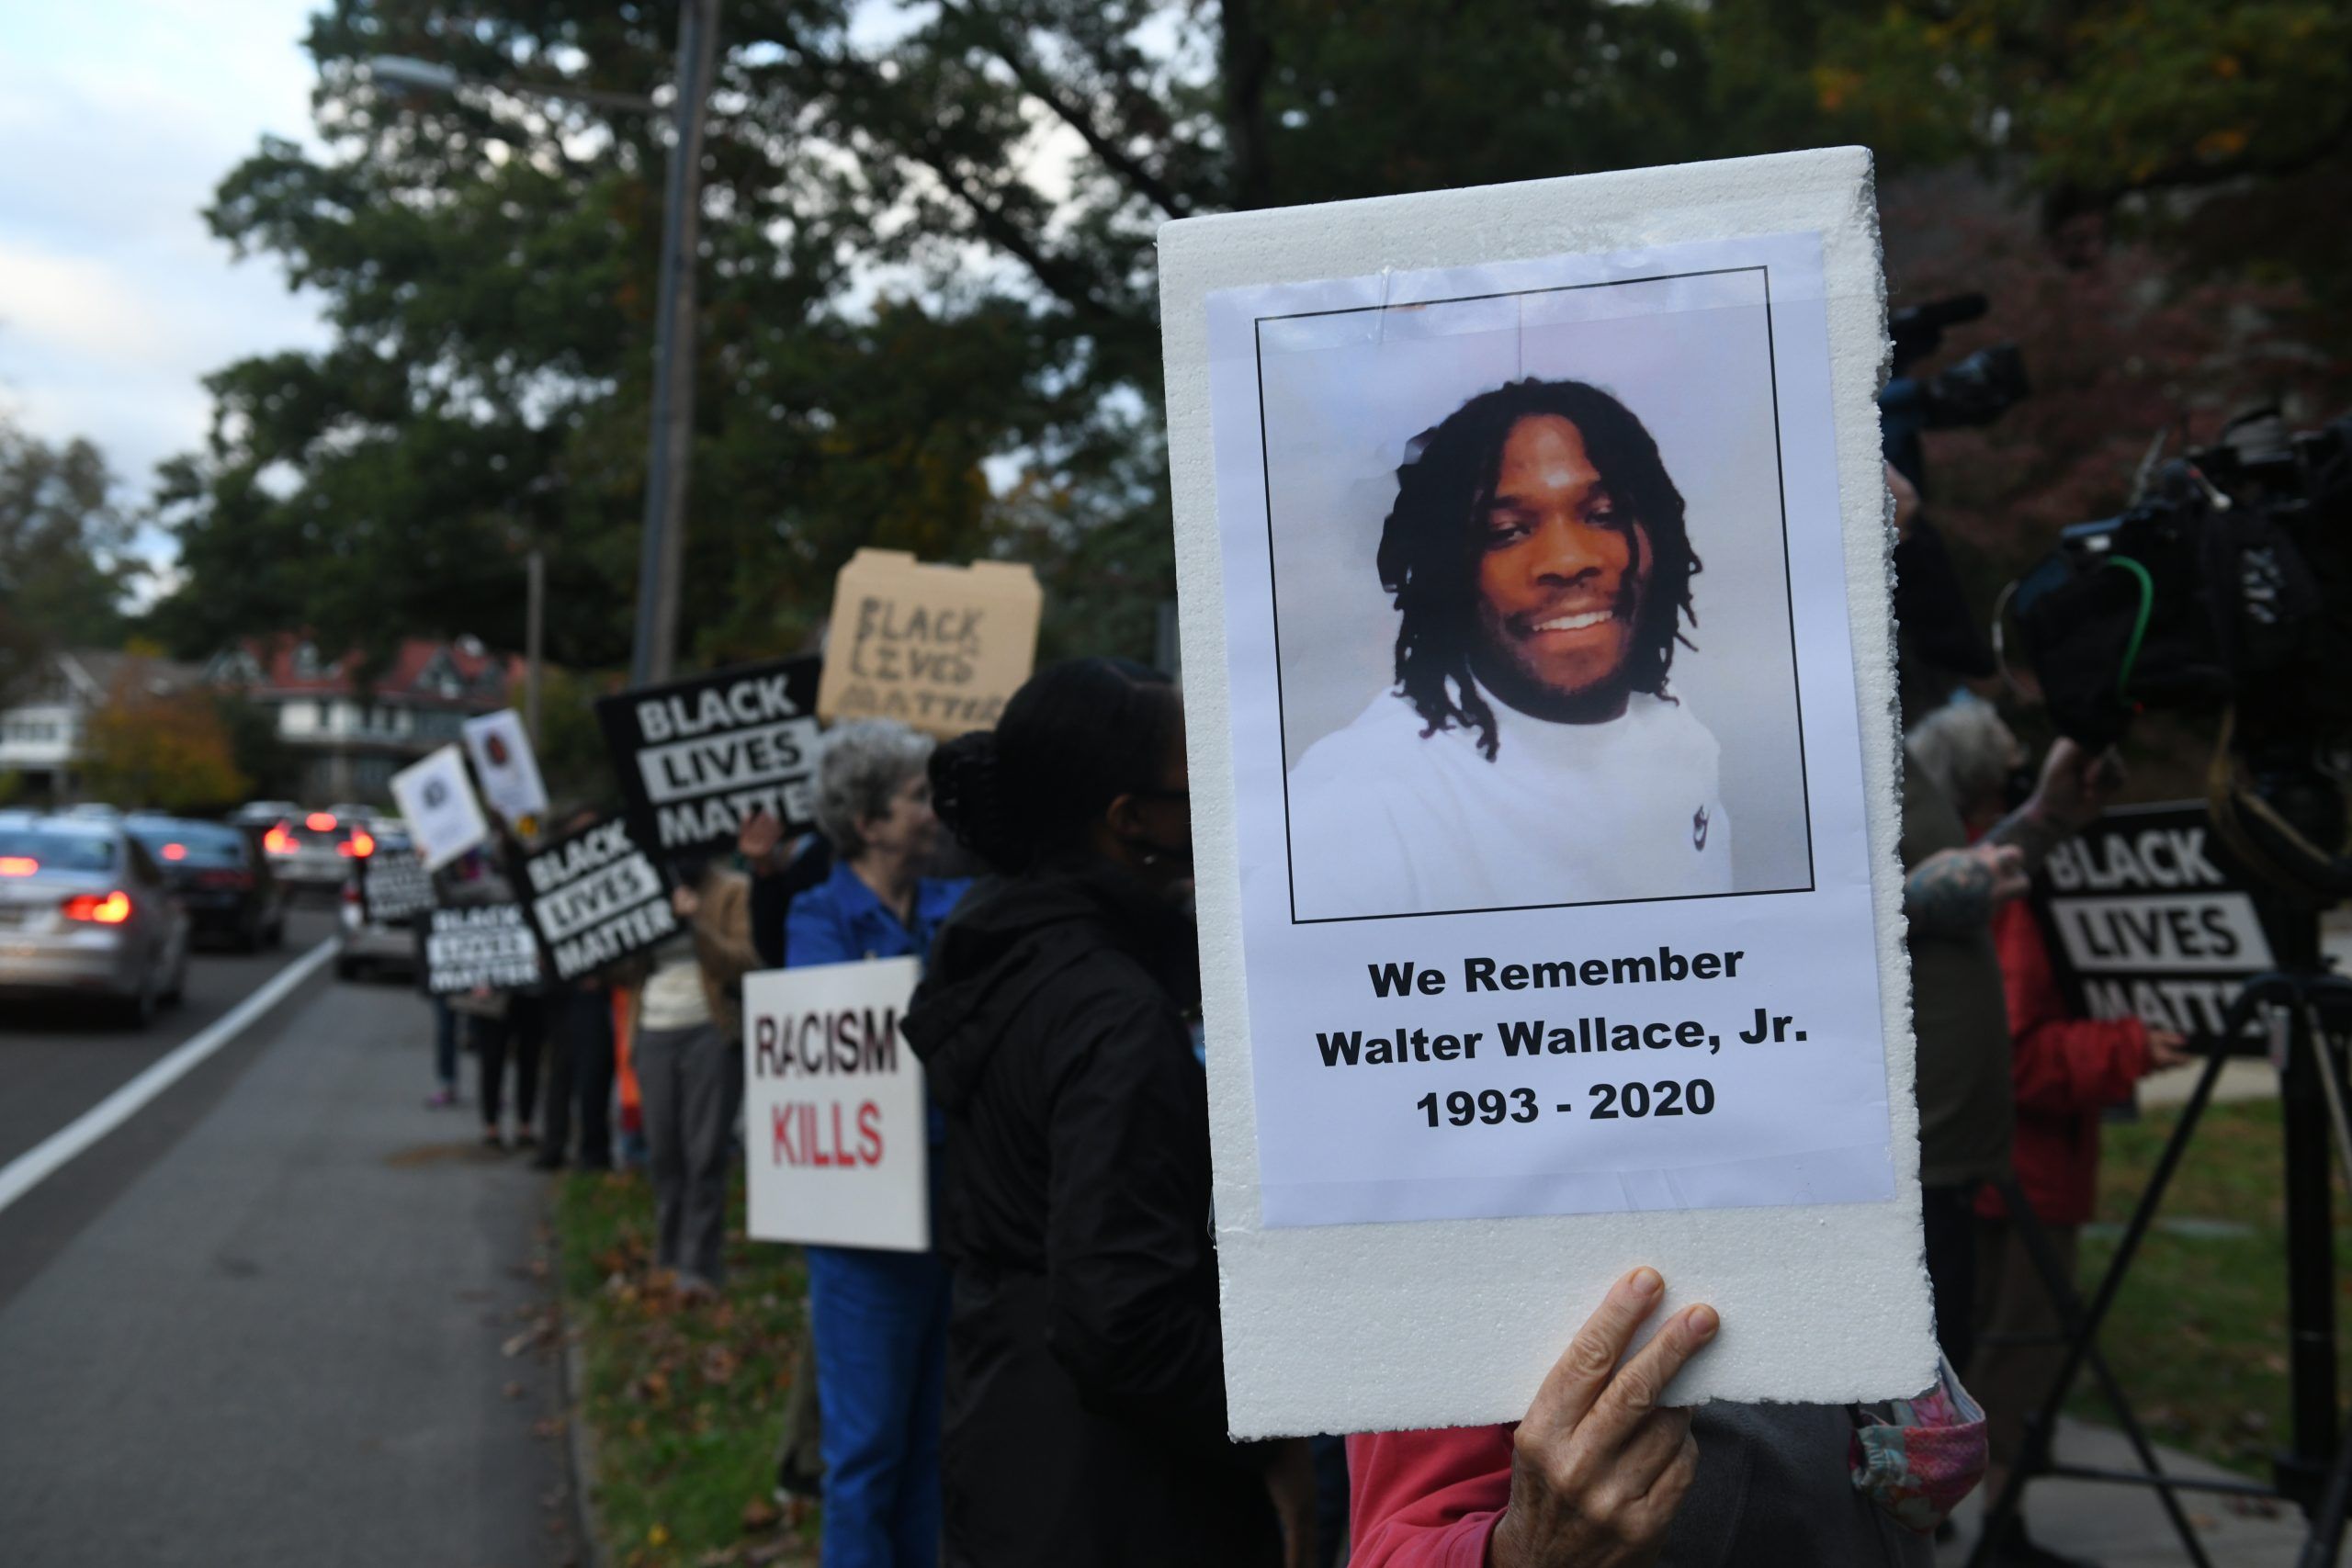 Philadelphia residents honored the life of Walter Wallace Jr. one year after he was killed by police officers. Photo by Max Silverman